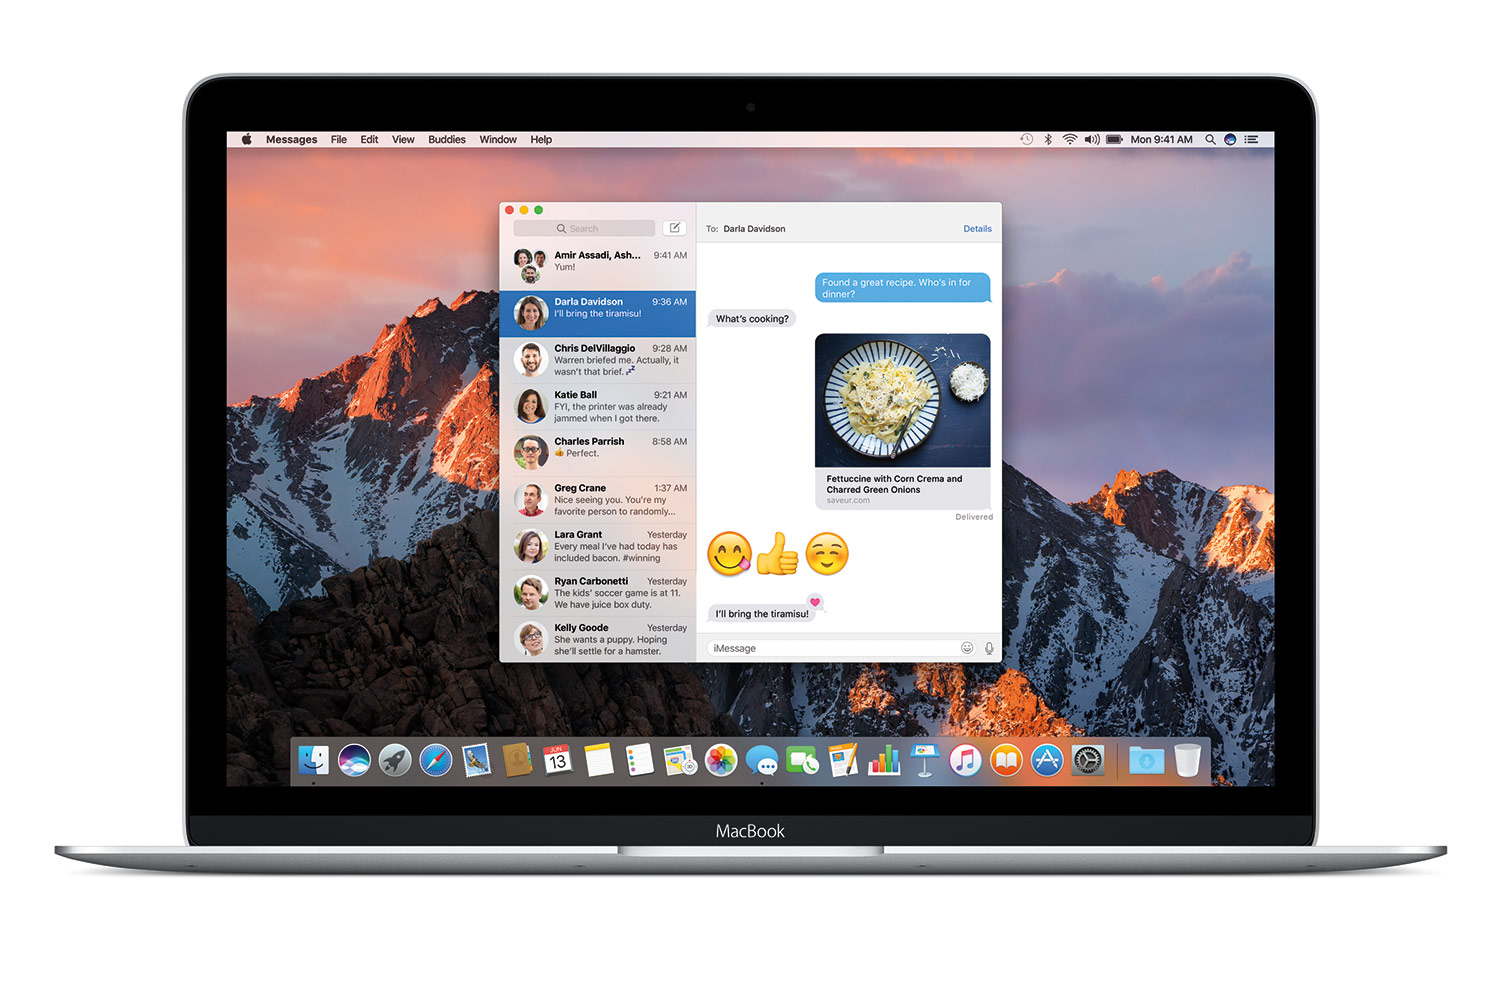 os x name change to macos and first version macossierra 003